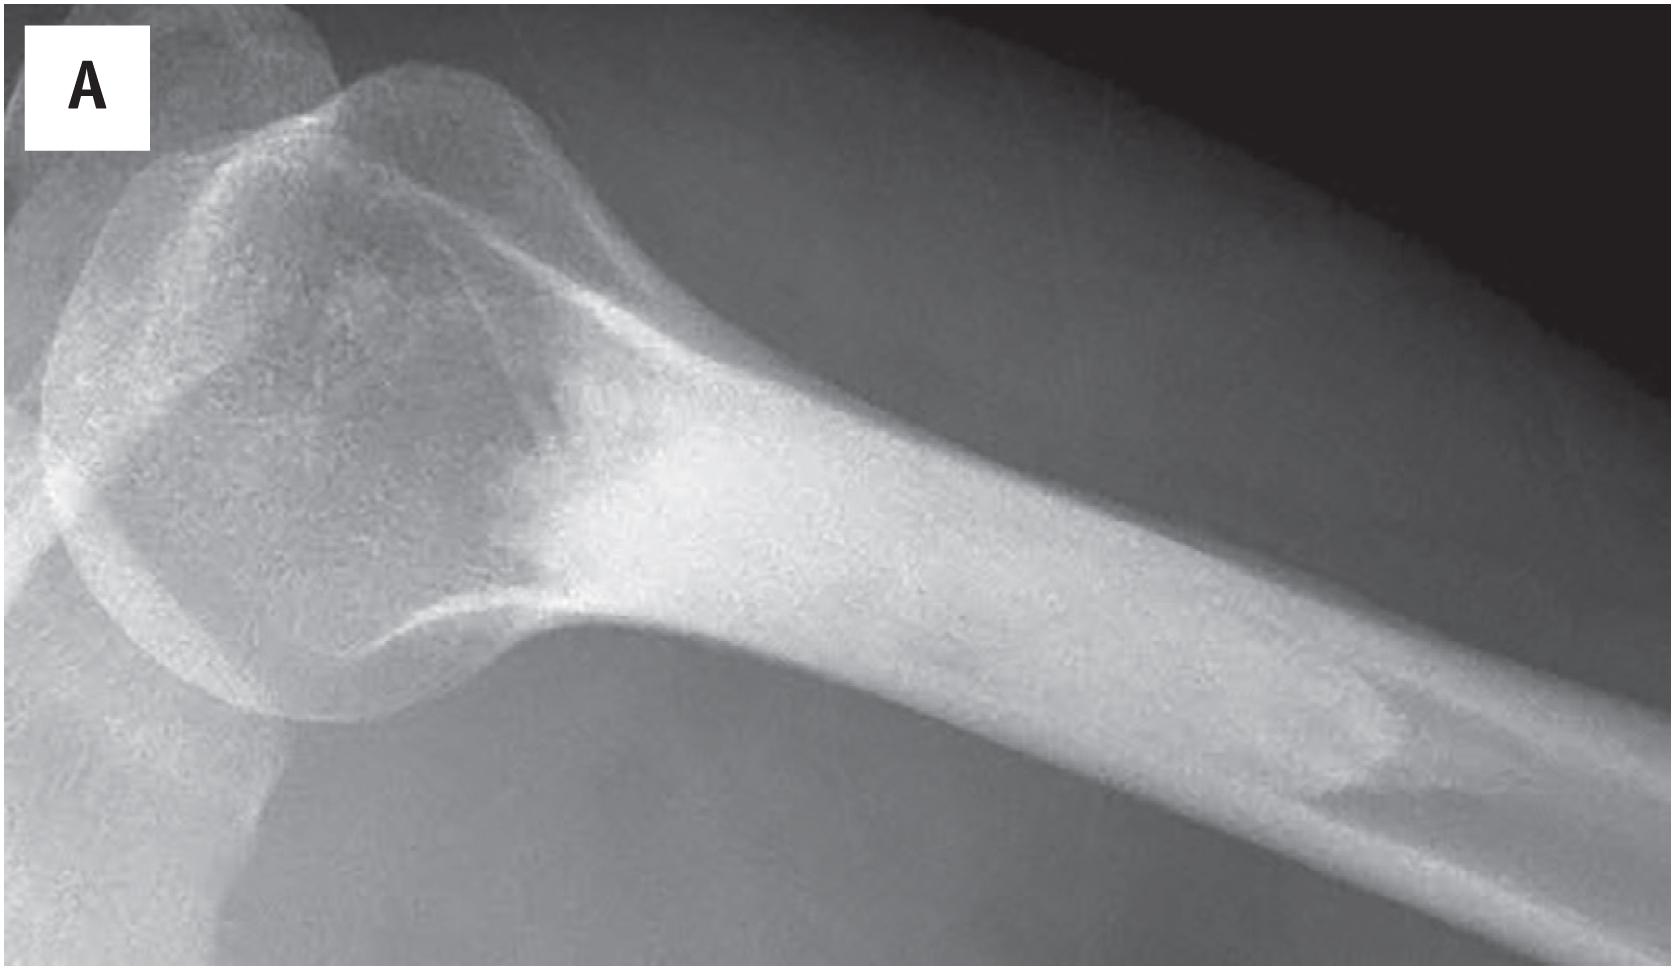 Fig. 16.2, (A) The large bone island is radiodense and fills medullary cavity of humerus in this lateral radiograph. (B) Axial computed tomographic scan of a large bone island replacing the medullary cavity.